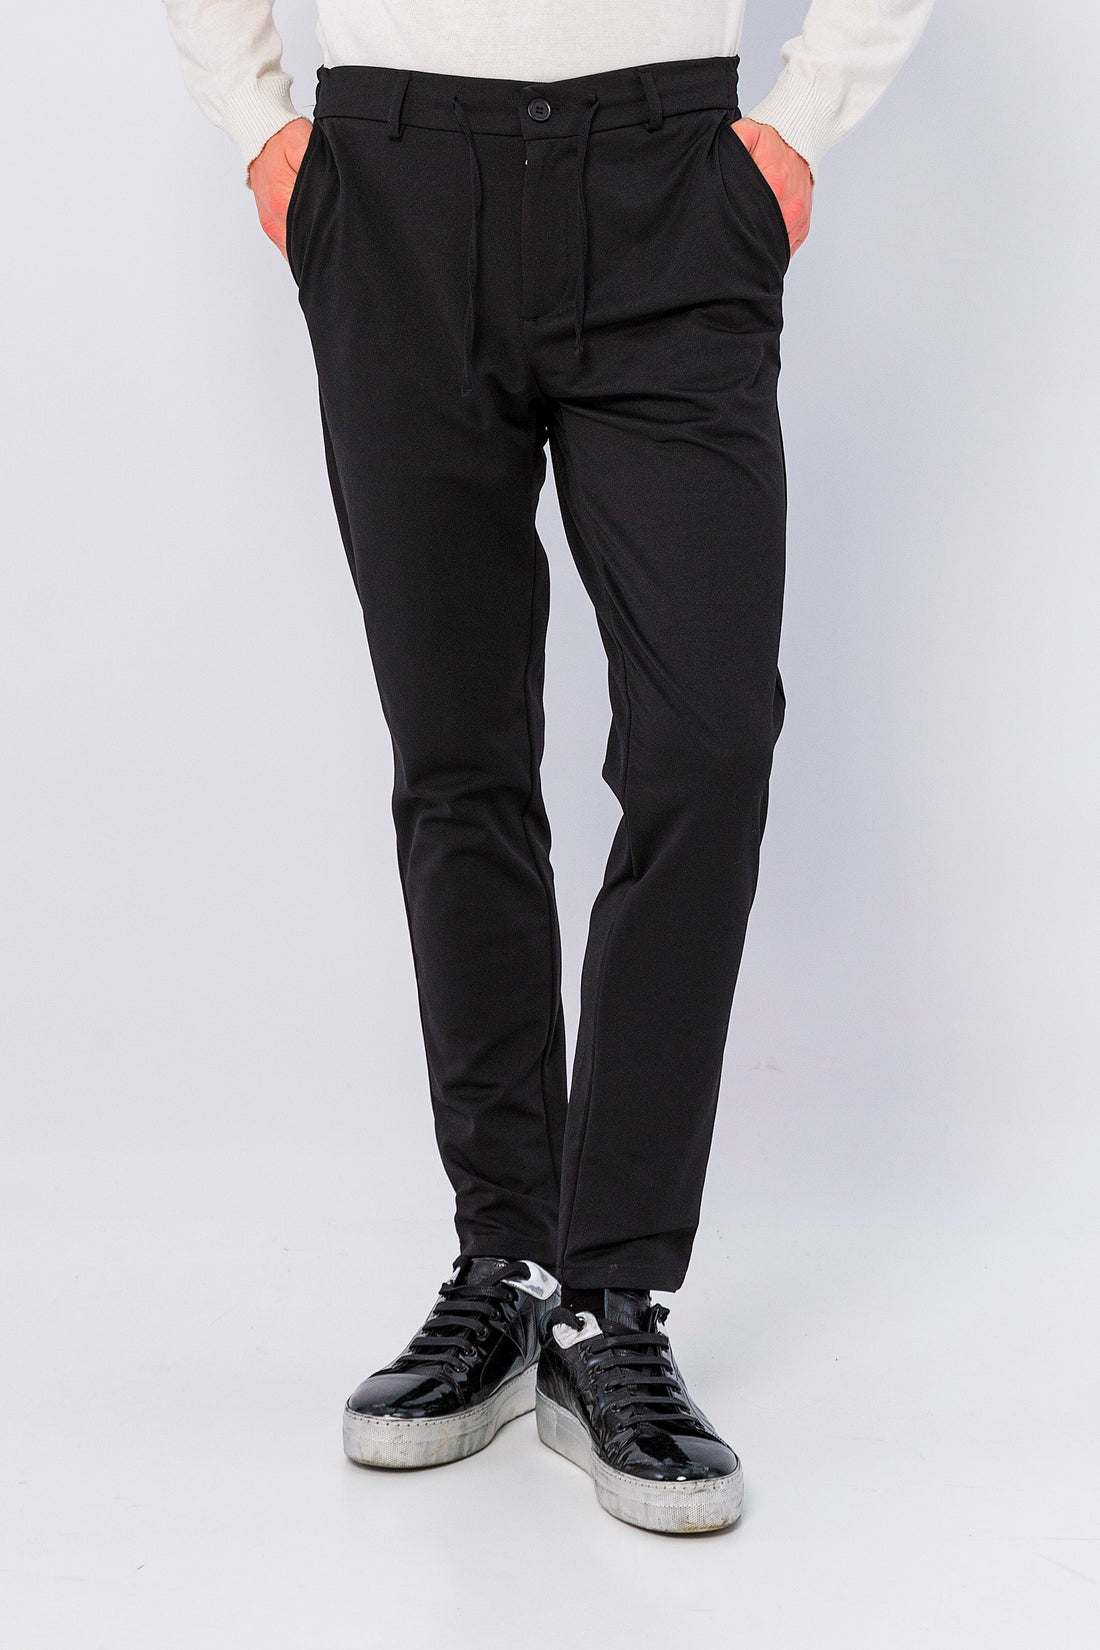 Fitted Casual Everyday Pants - Black